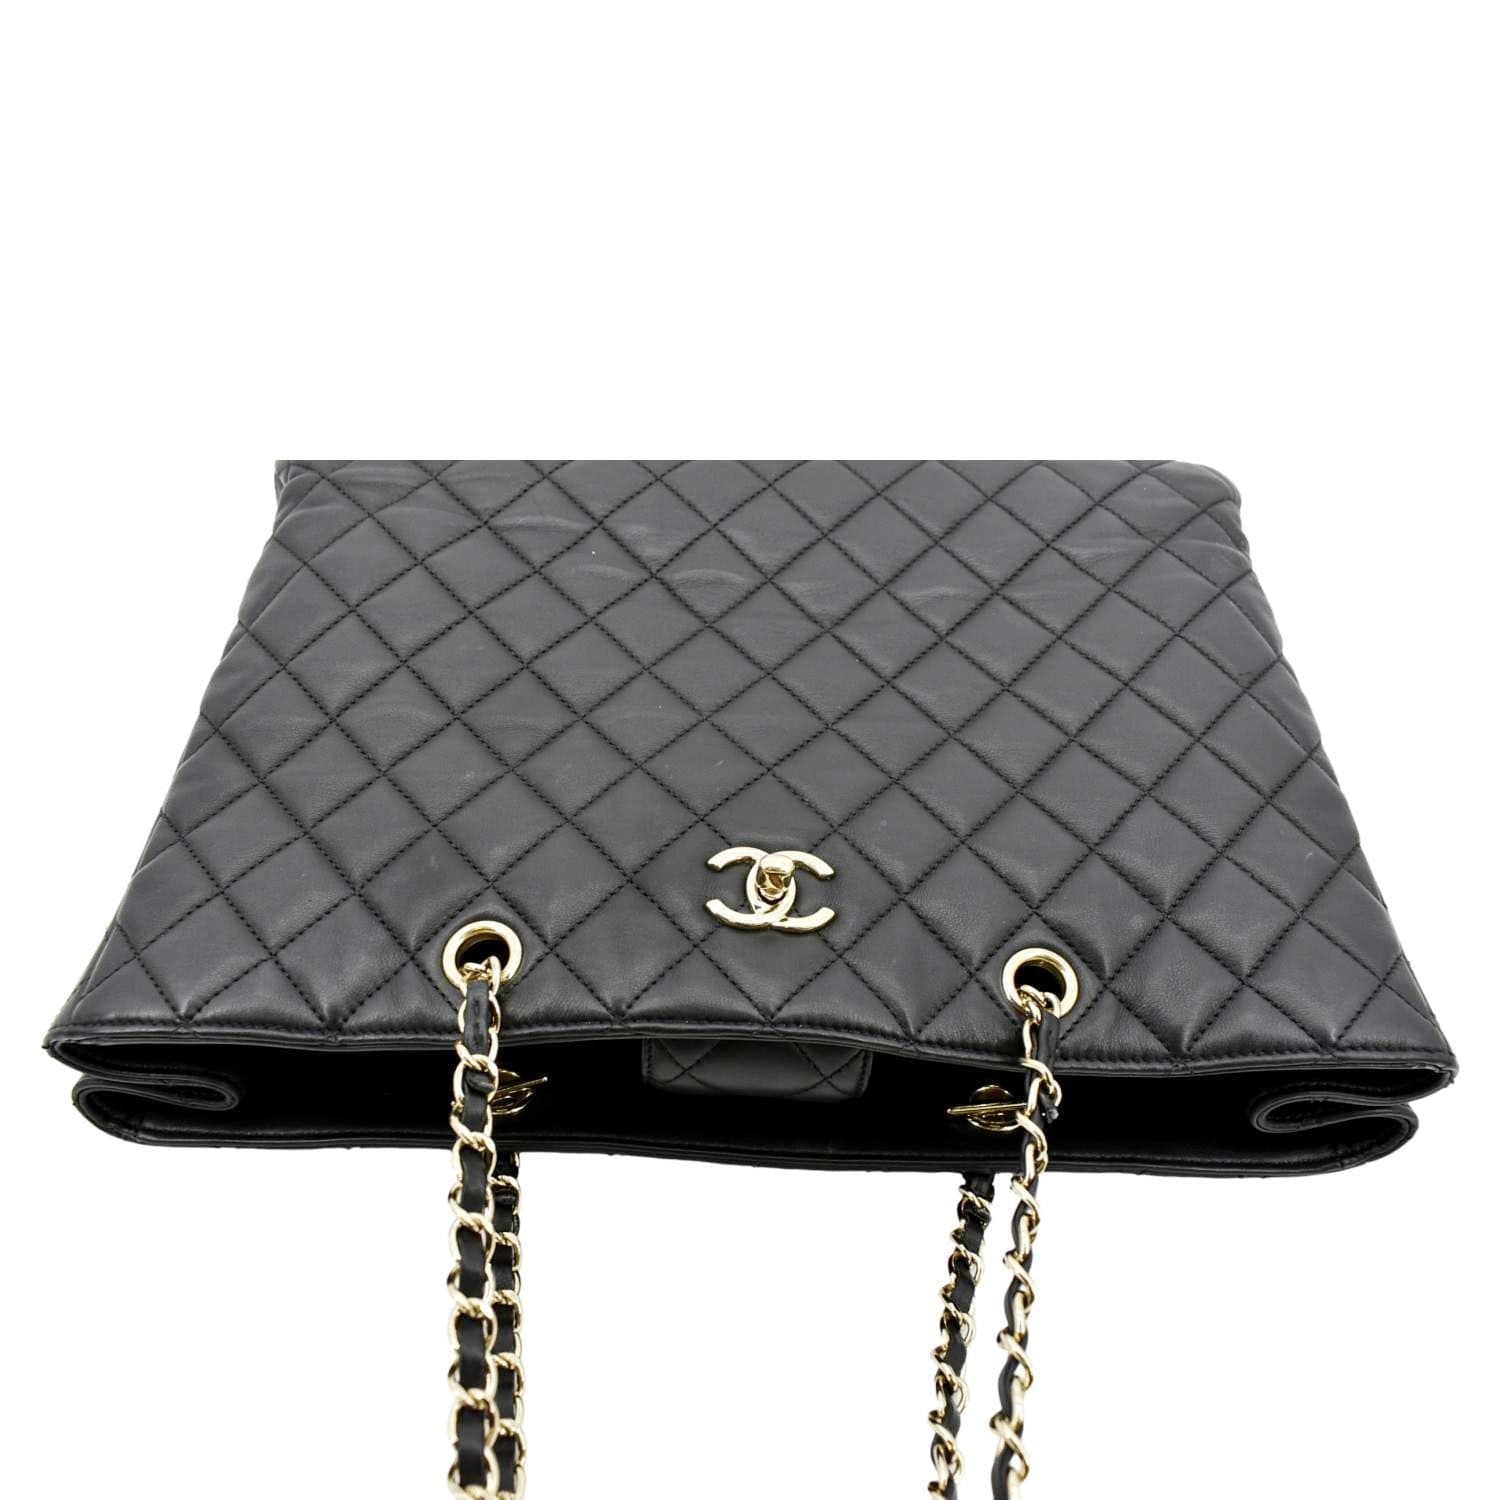 CHANEL Large Classic Shopping Quilted Leather Tote Bag Black